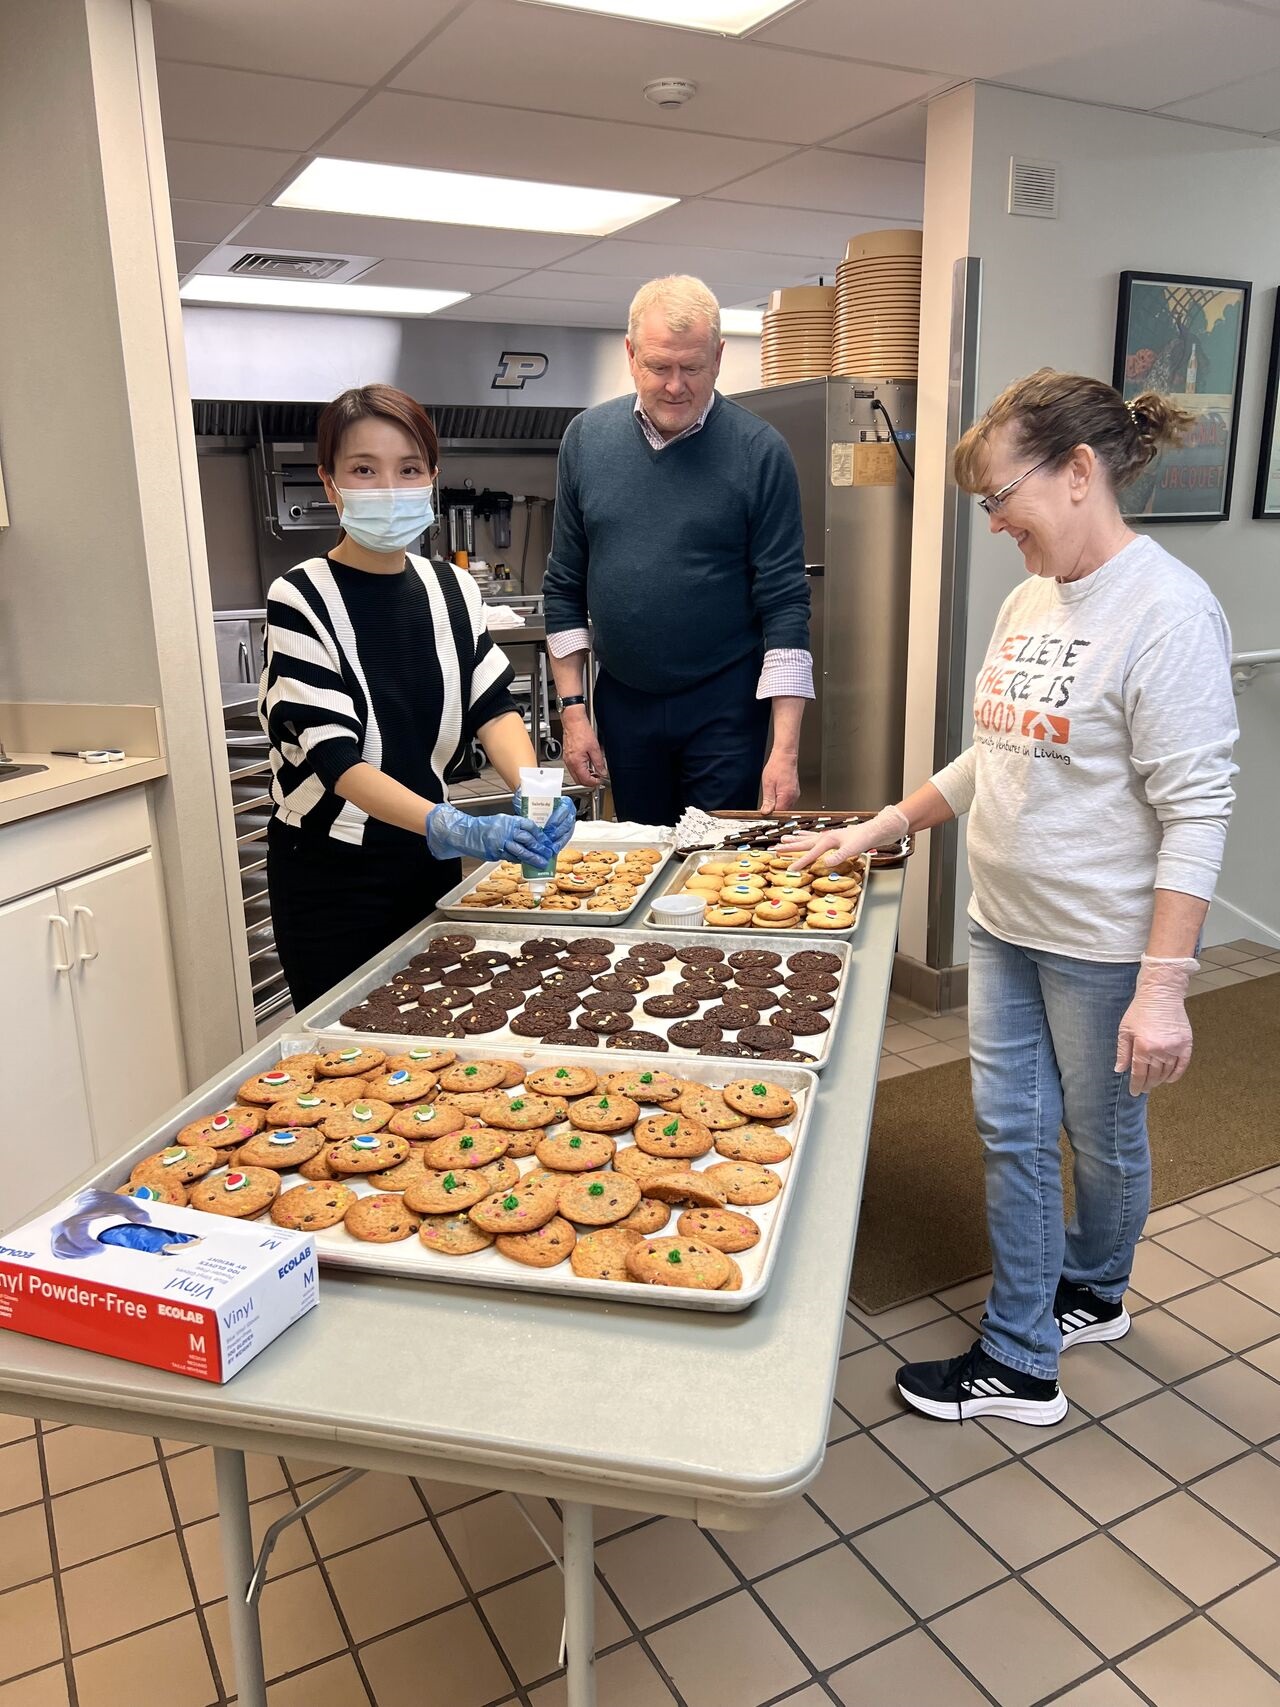 Home-baked cookies for our Purdue University students taking finals. 💛🖤 Anthony and Sheila for the helped with the baking and decorating!